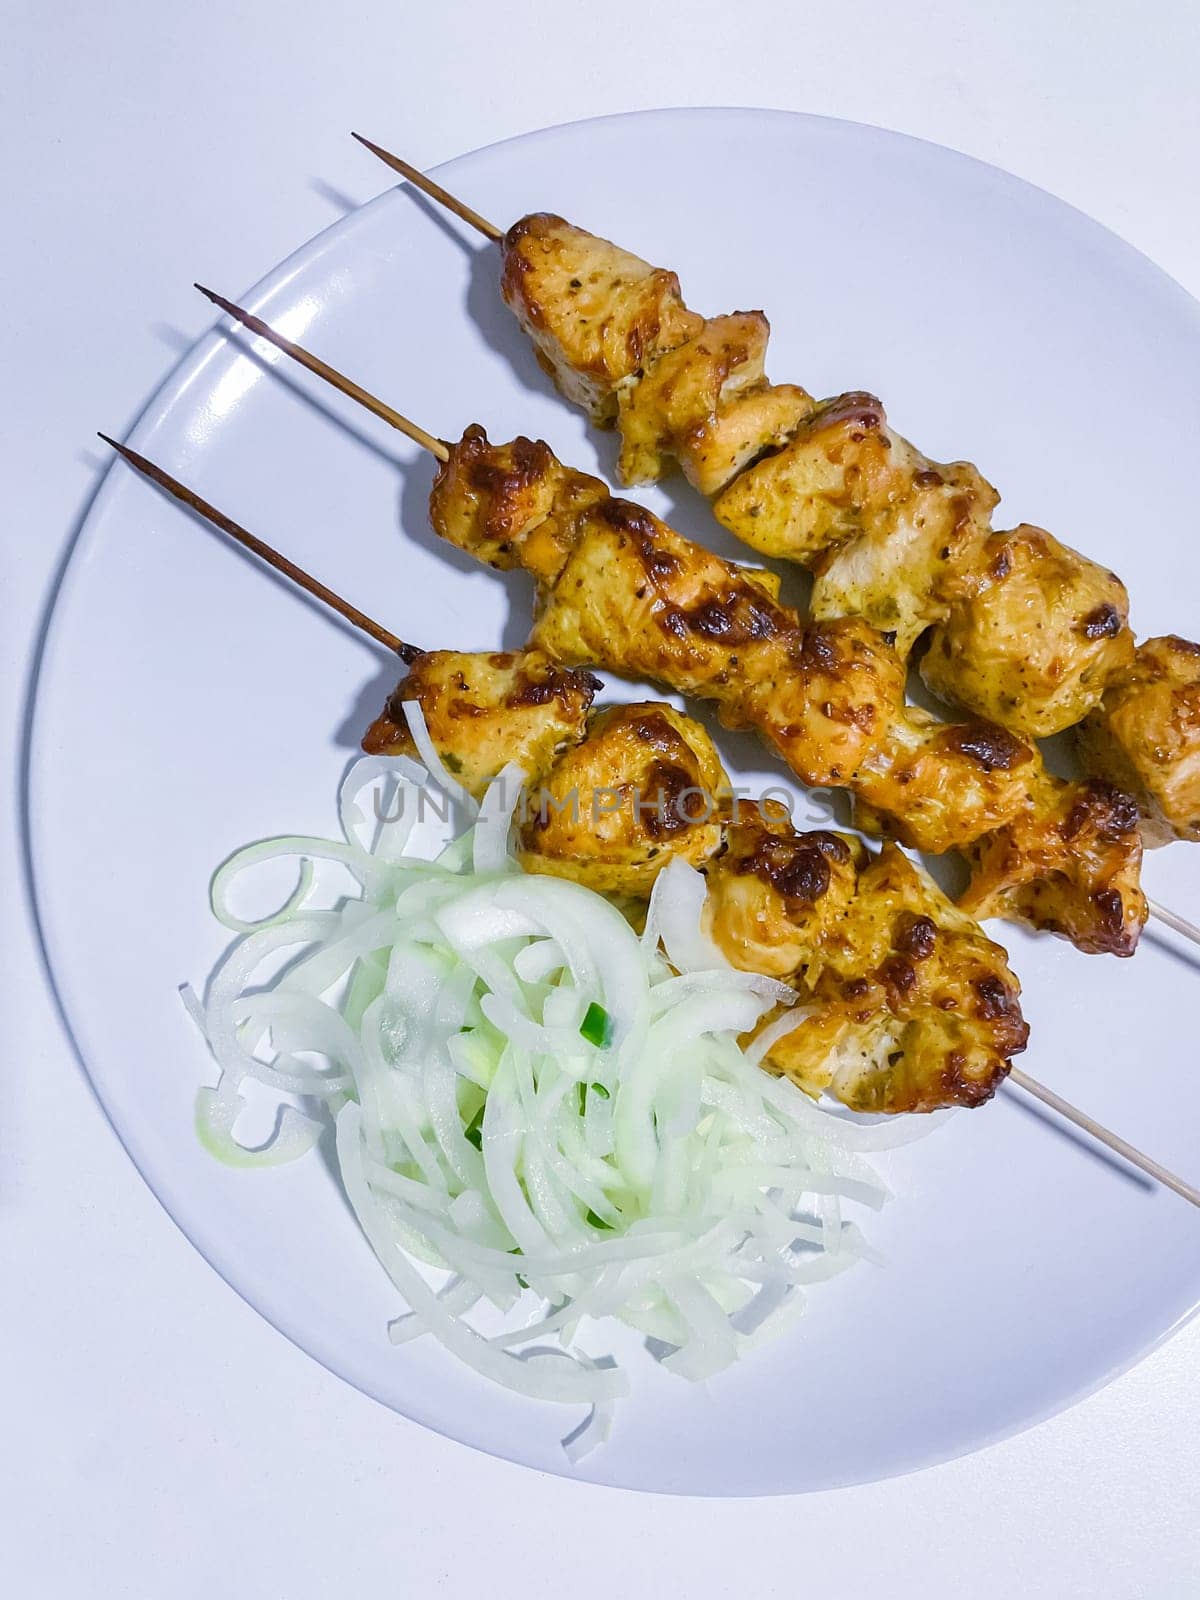 Traditional delicious turkey or chicken shish kebab skewer barbecue meat with tomatoes, pepper and sauce. Served on white kitchen table background. Natural light. Picnic bbq gourmet.